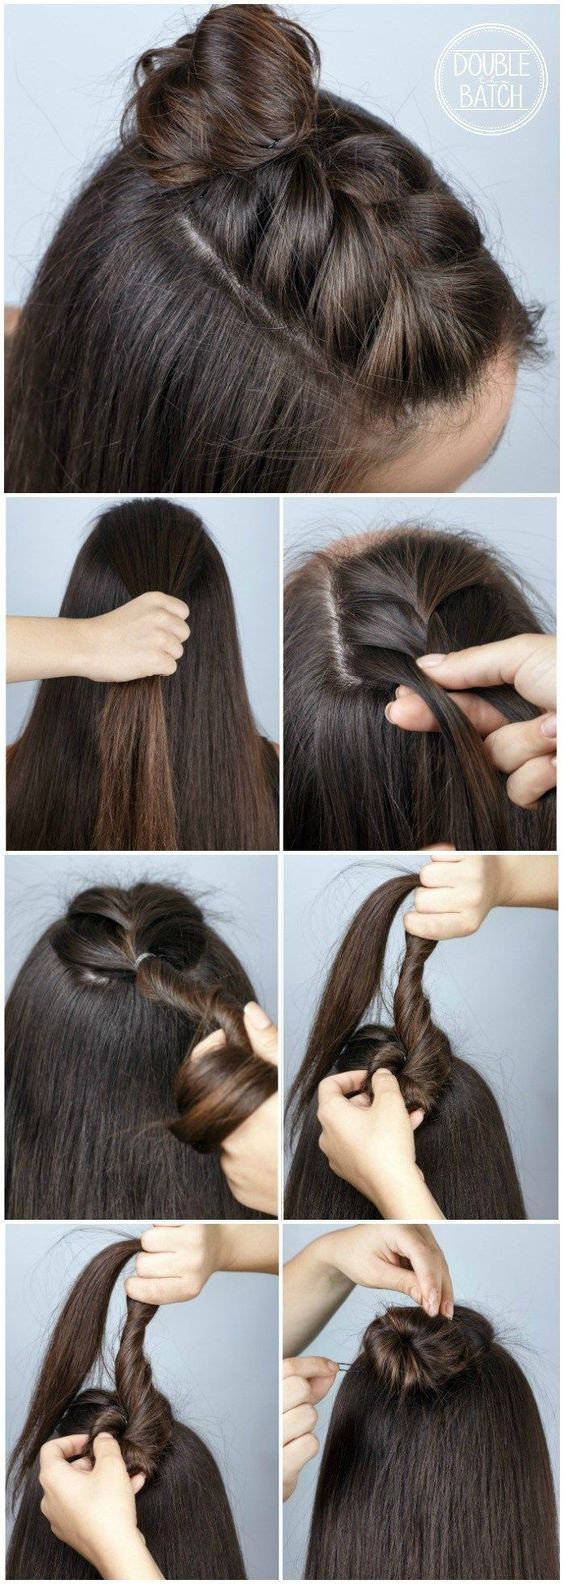 Quick Easy Hairstyles
 22 Quick and Easy Back to School Hairstyle Tutorials